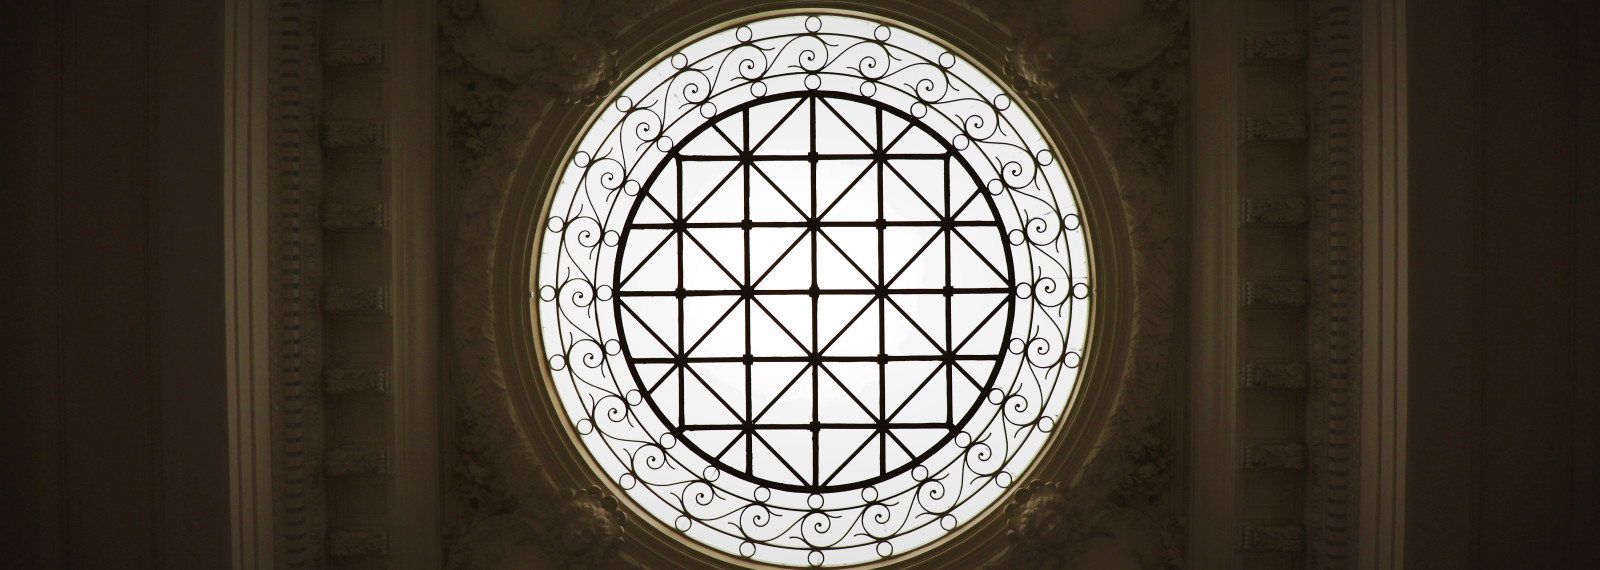 Looking up through a circular window in a roof